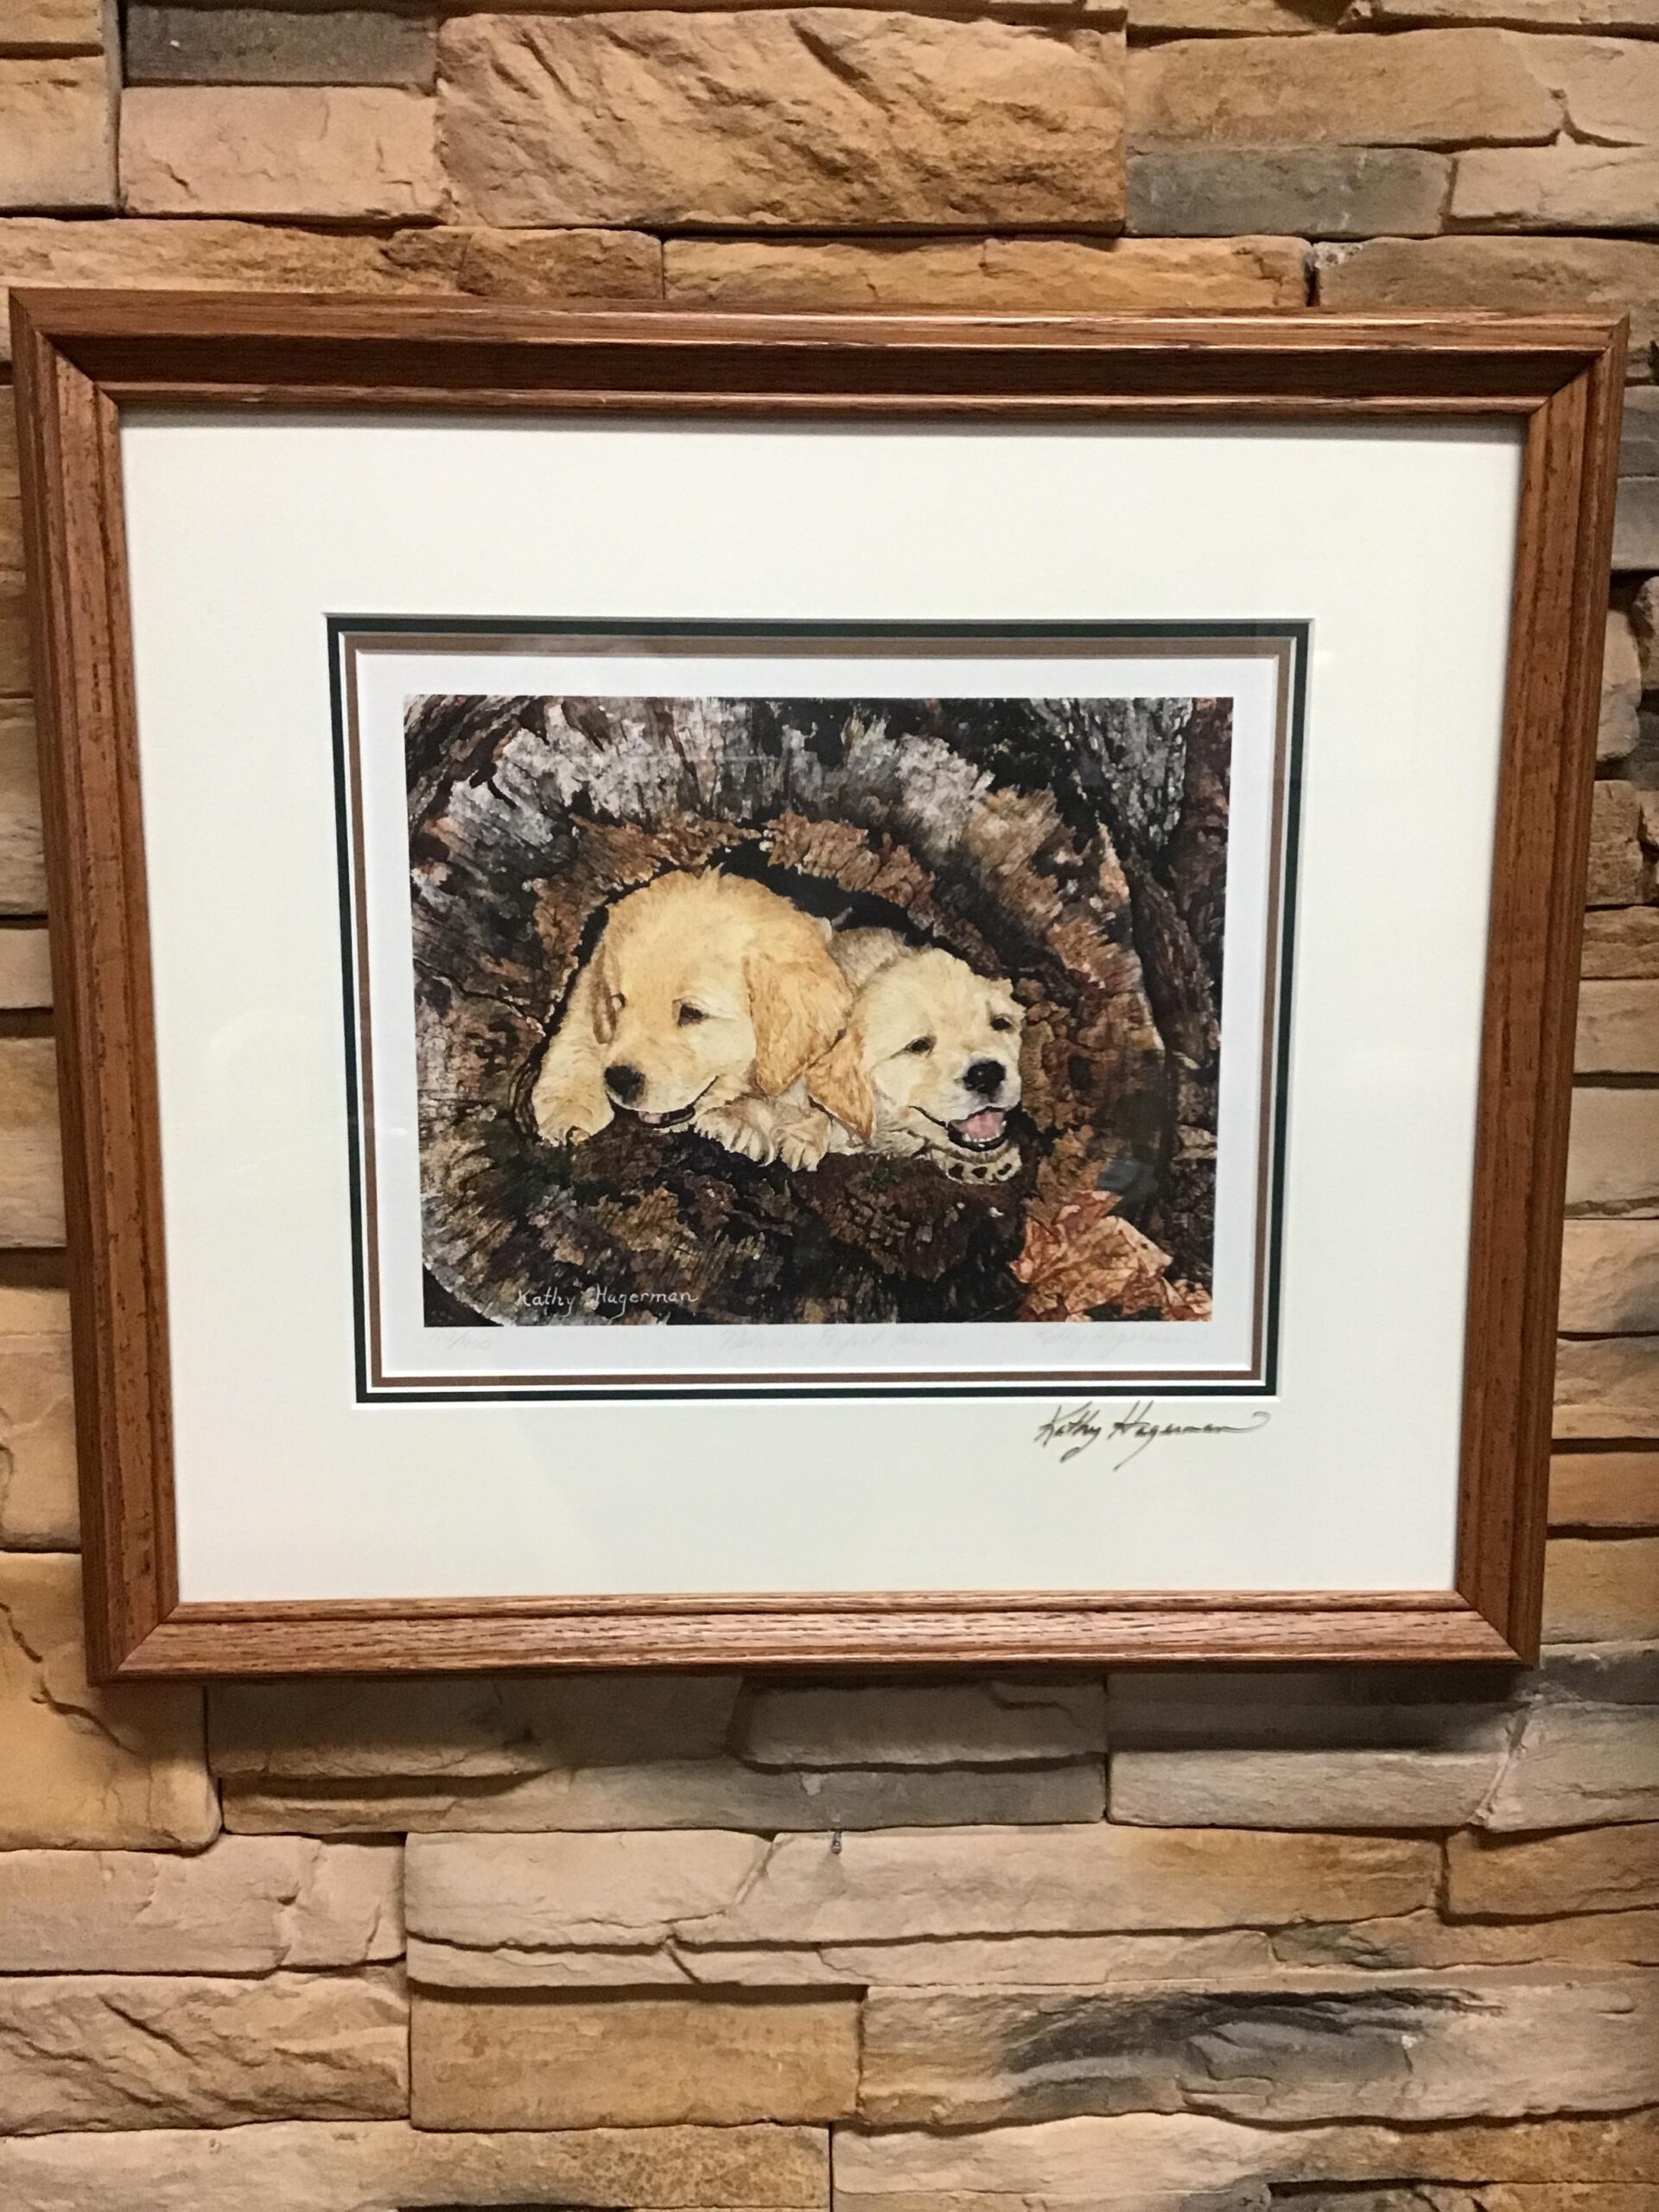 Kathy Hagerman Framed Print ‘Nature’s Perfect Home’